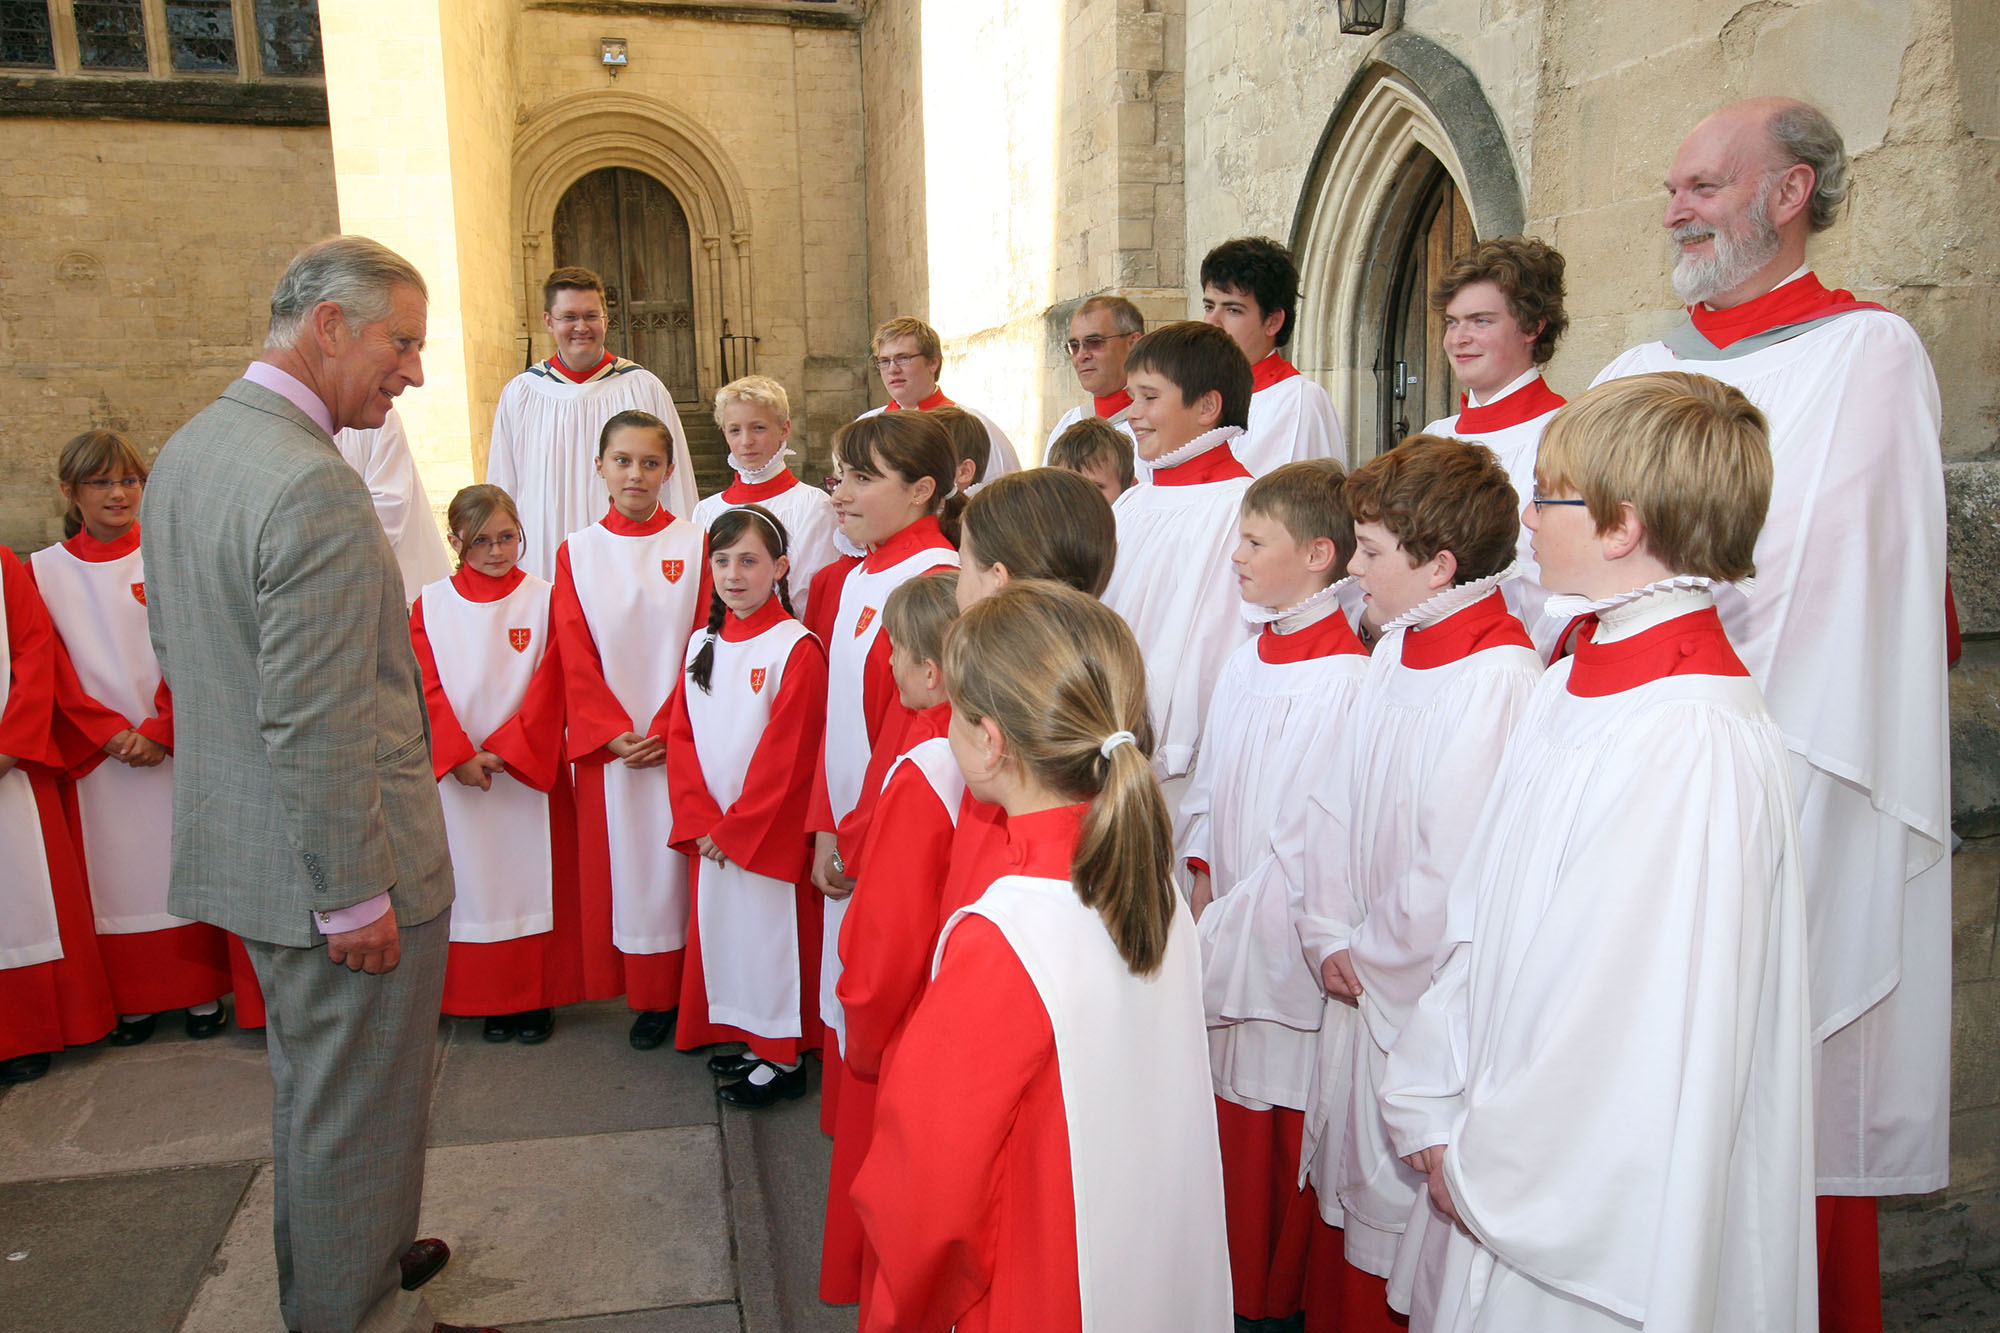 Exeter Cathedral Choir - 2010